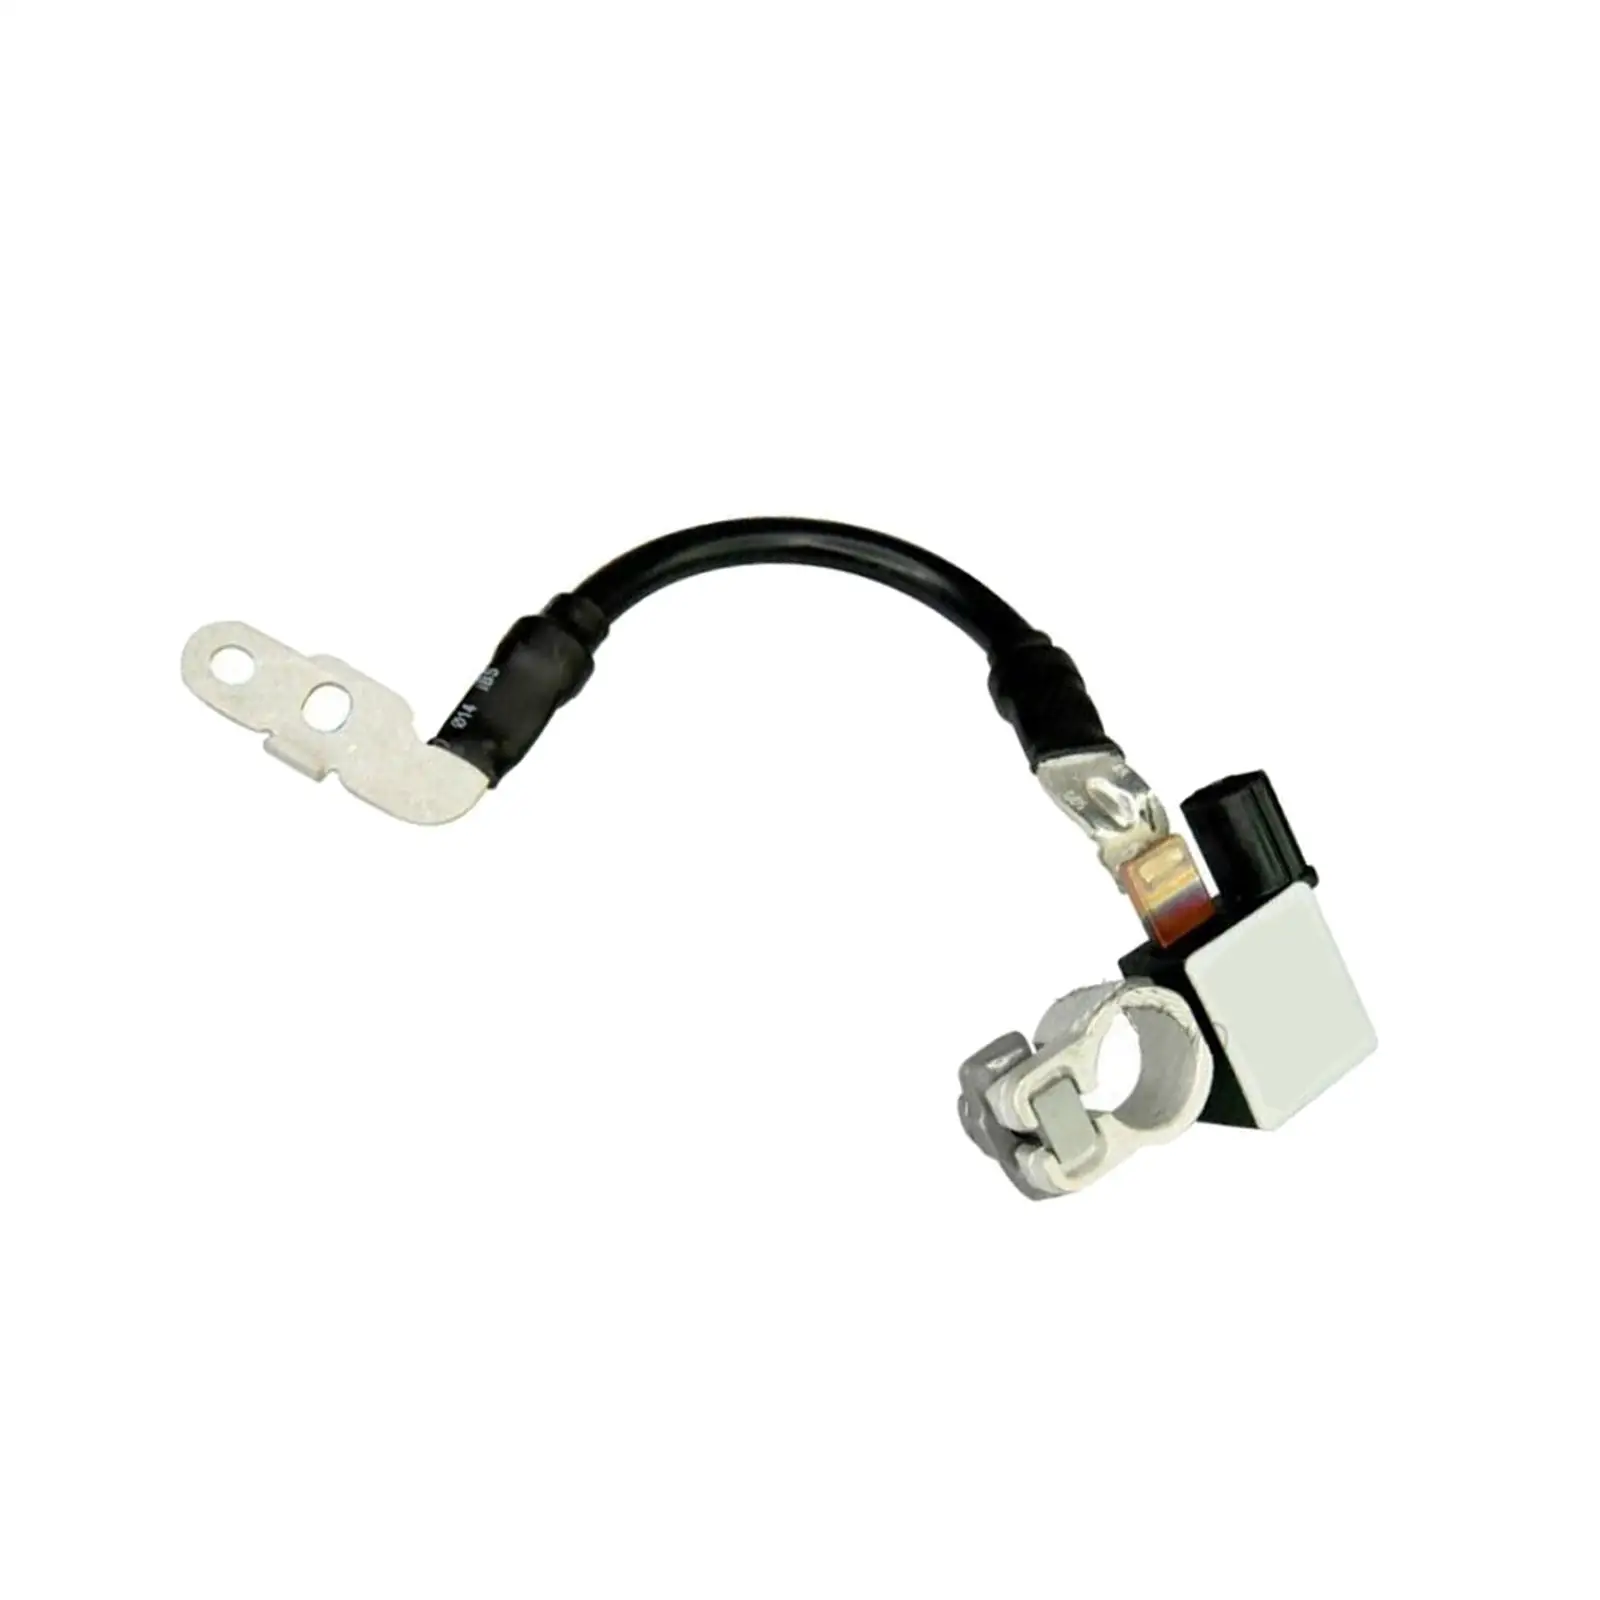 Auto Negative Cable Assy 37180-3x300 37180-A7000 Replacement High Quality